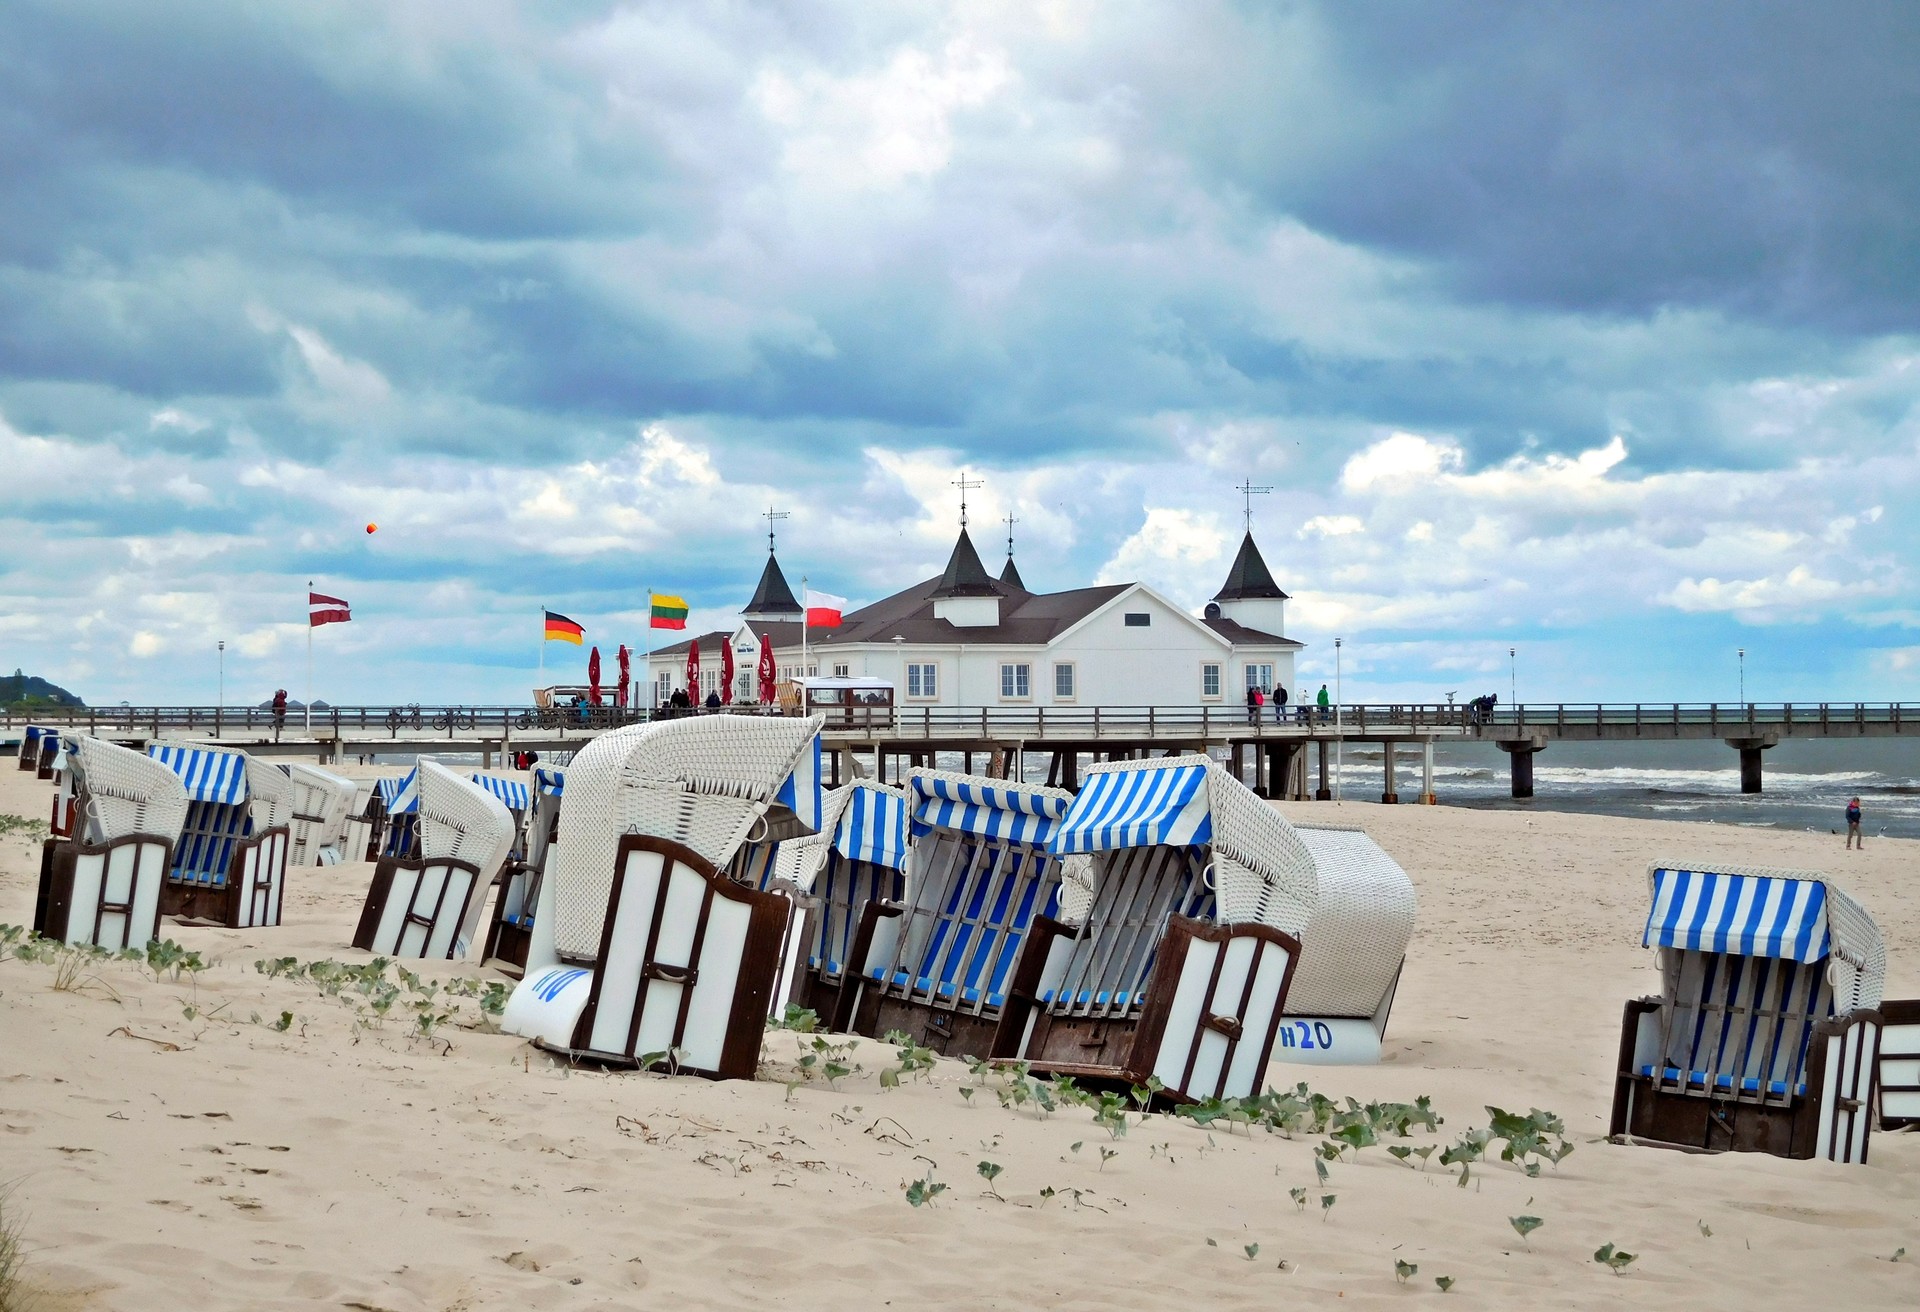 Beach of Ahlbeck. View of hooded beach chairs and the historic sea bridge.